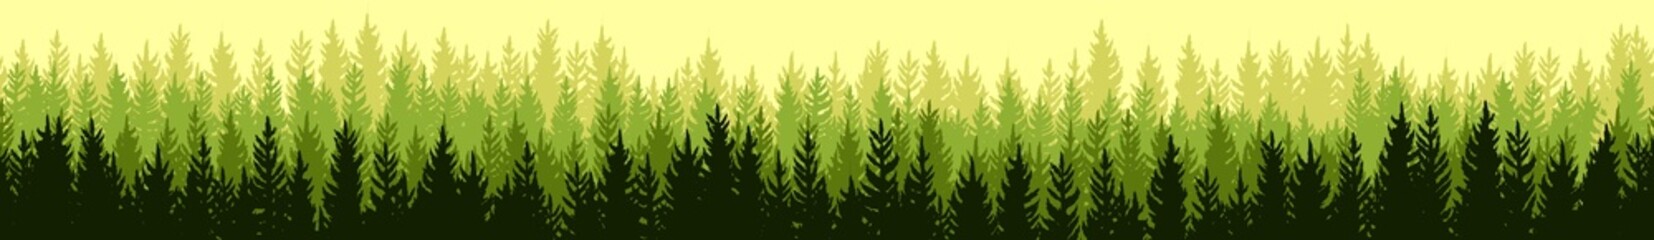 Coniferous forest silhouette. Wild trees. Pine, cedar, spruce, fir, larch. Siberian taiga. Beauty of harsh northern nature. Landscape is horizontal. Illustration vector